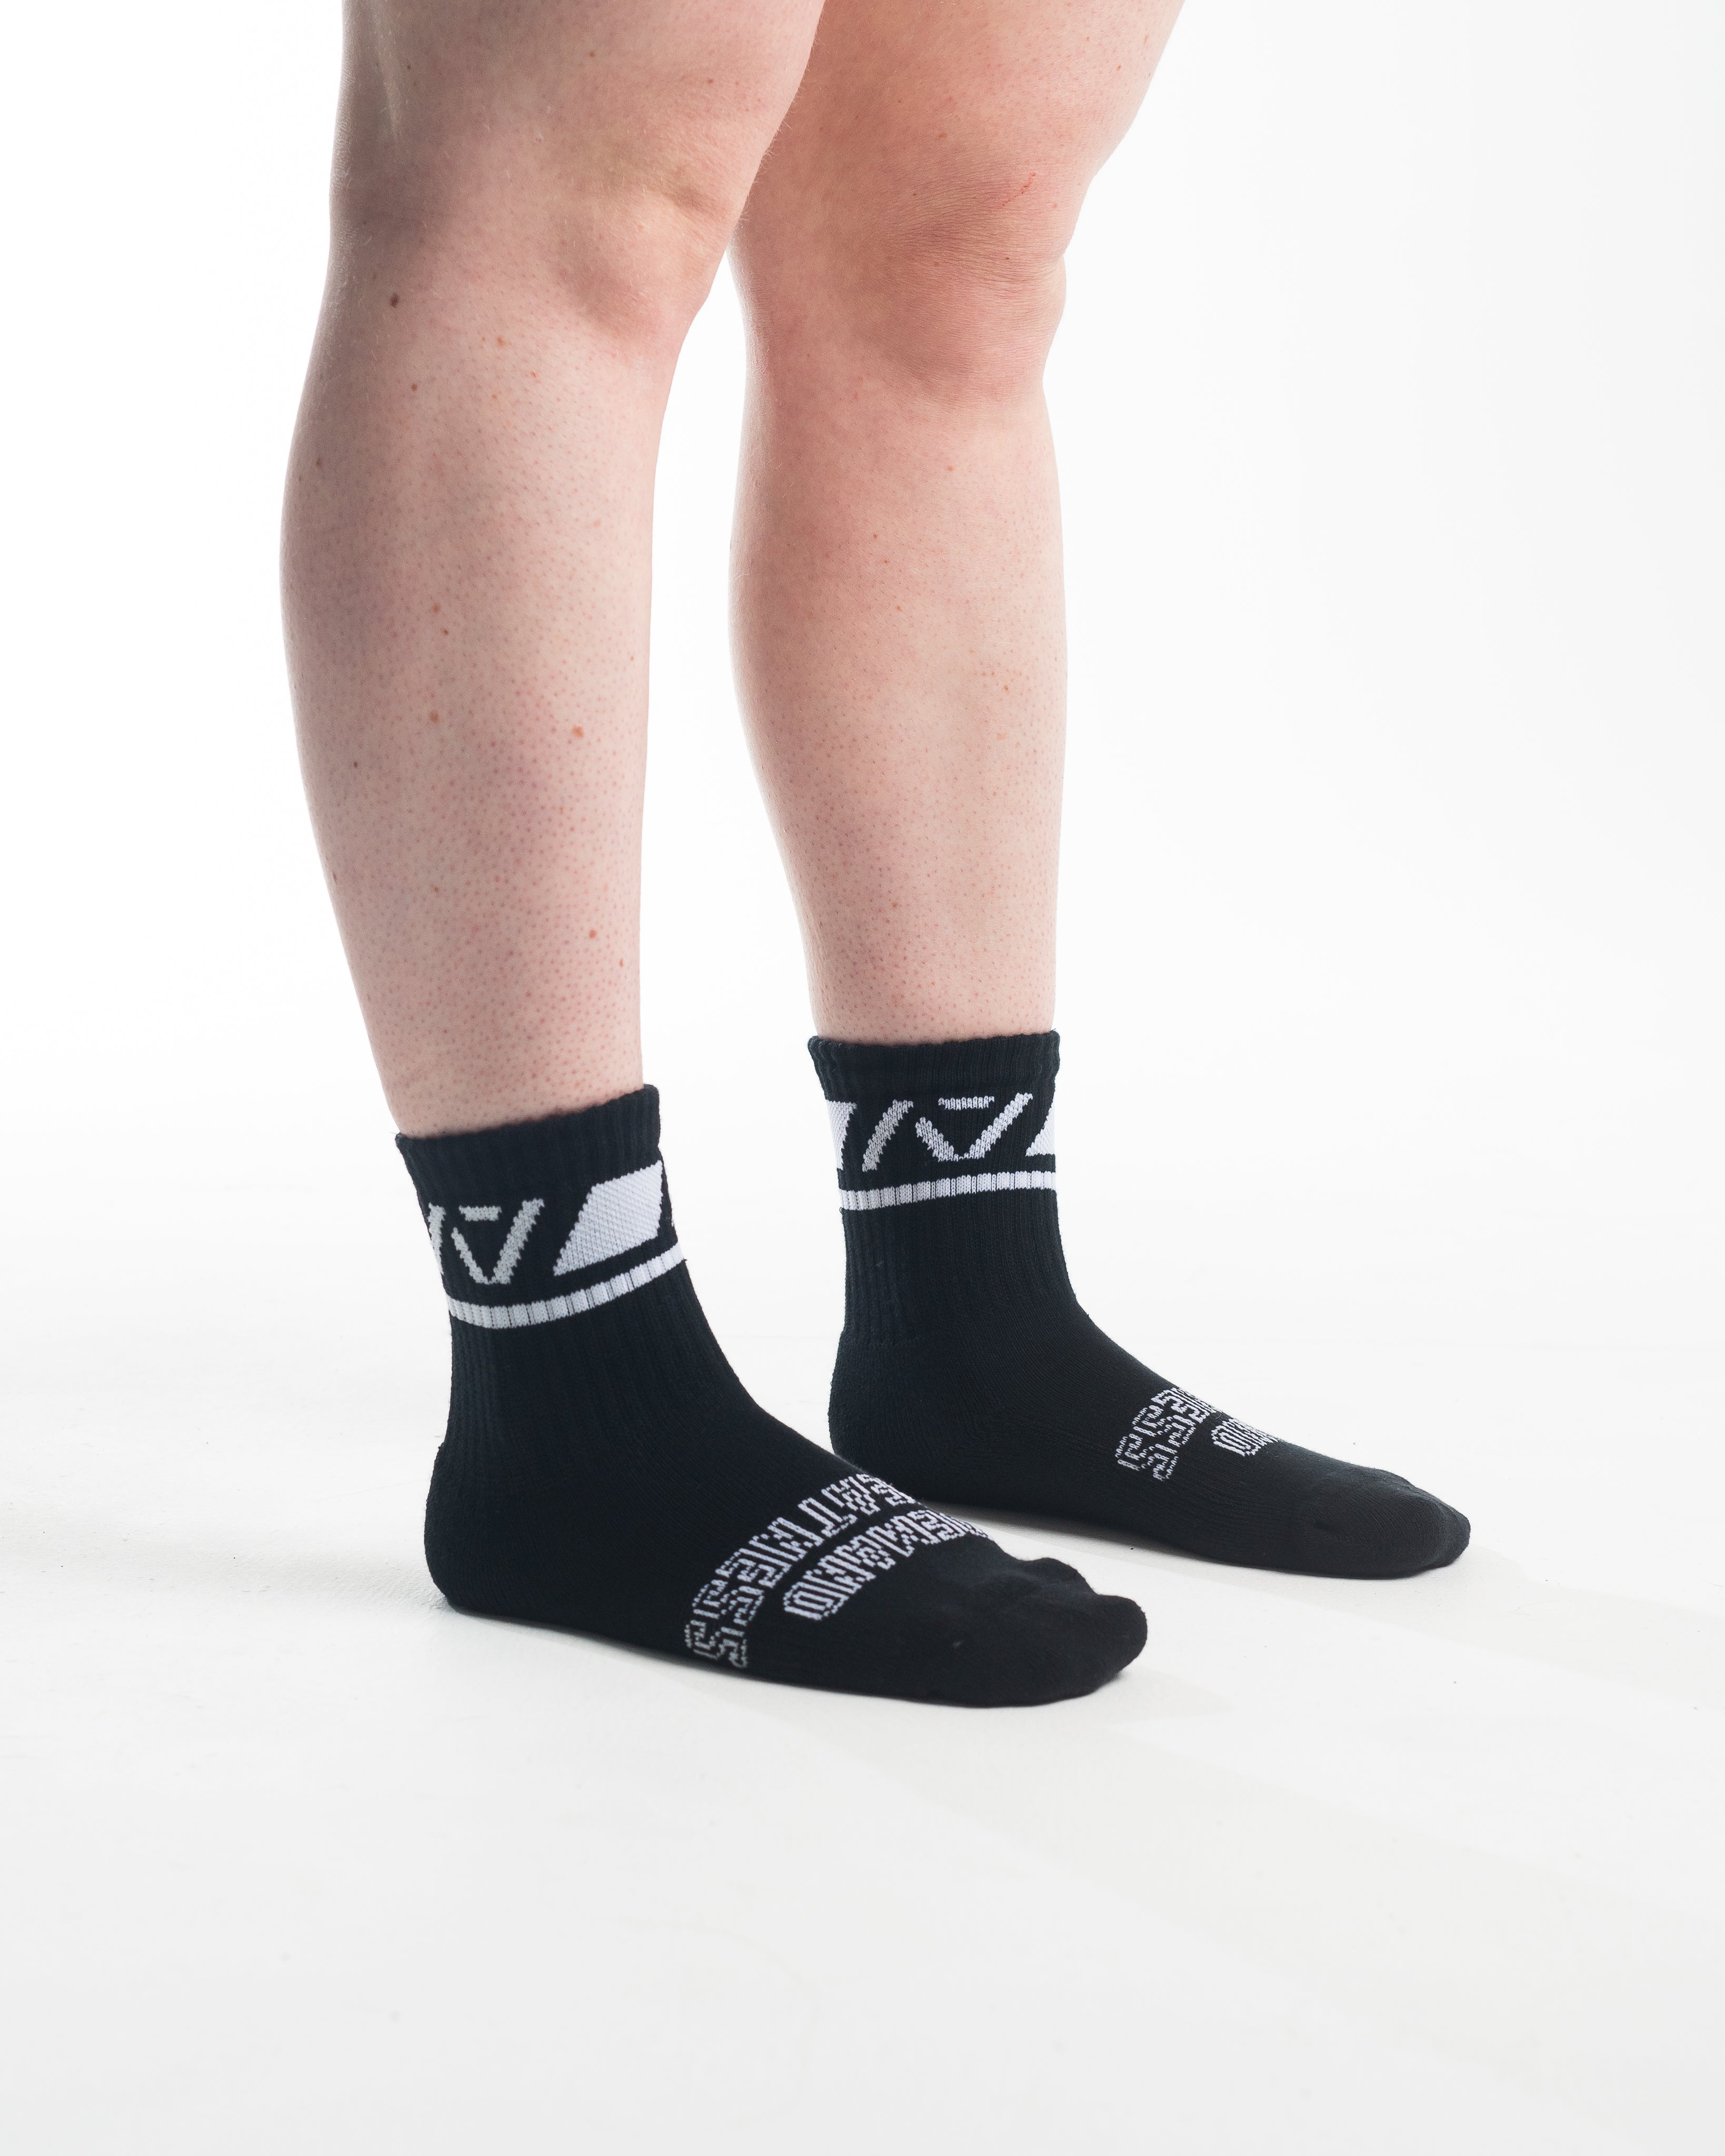 A7 Domino Crew socks showcase gold logos and let your energy show on the platform, in your training or while out and about. The IPF Approved Stealth Meet Kit includes Powerlifting Singlet, A7 Meet Shirt, A7 Zebra Wrist Wraps, A7 Deadlift Socks, Hourglass Knee Sleeves (Stiff Knee Sleeves and Rigor Mortis Knee Sleeves). Genouillères powerlifting shipping to France, Spain, Ireland, Germany, Italy, Sweden and EU.